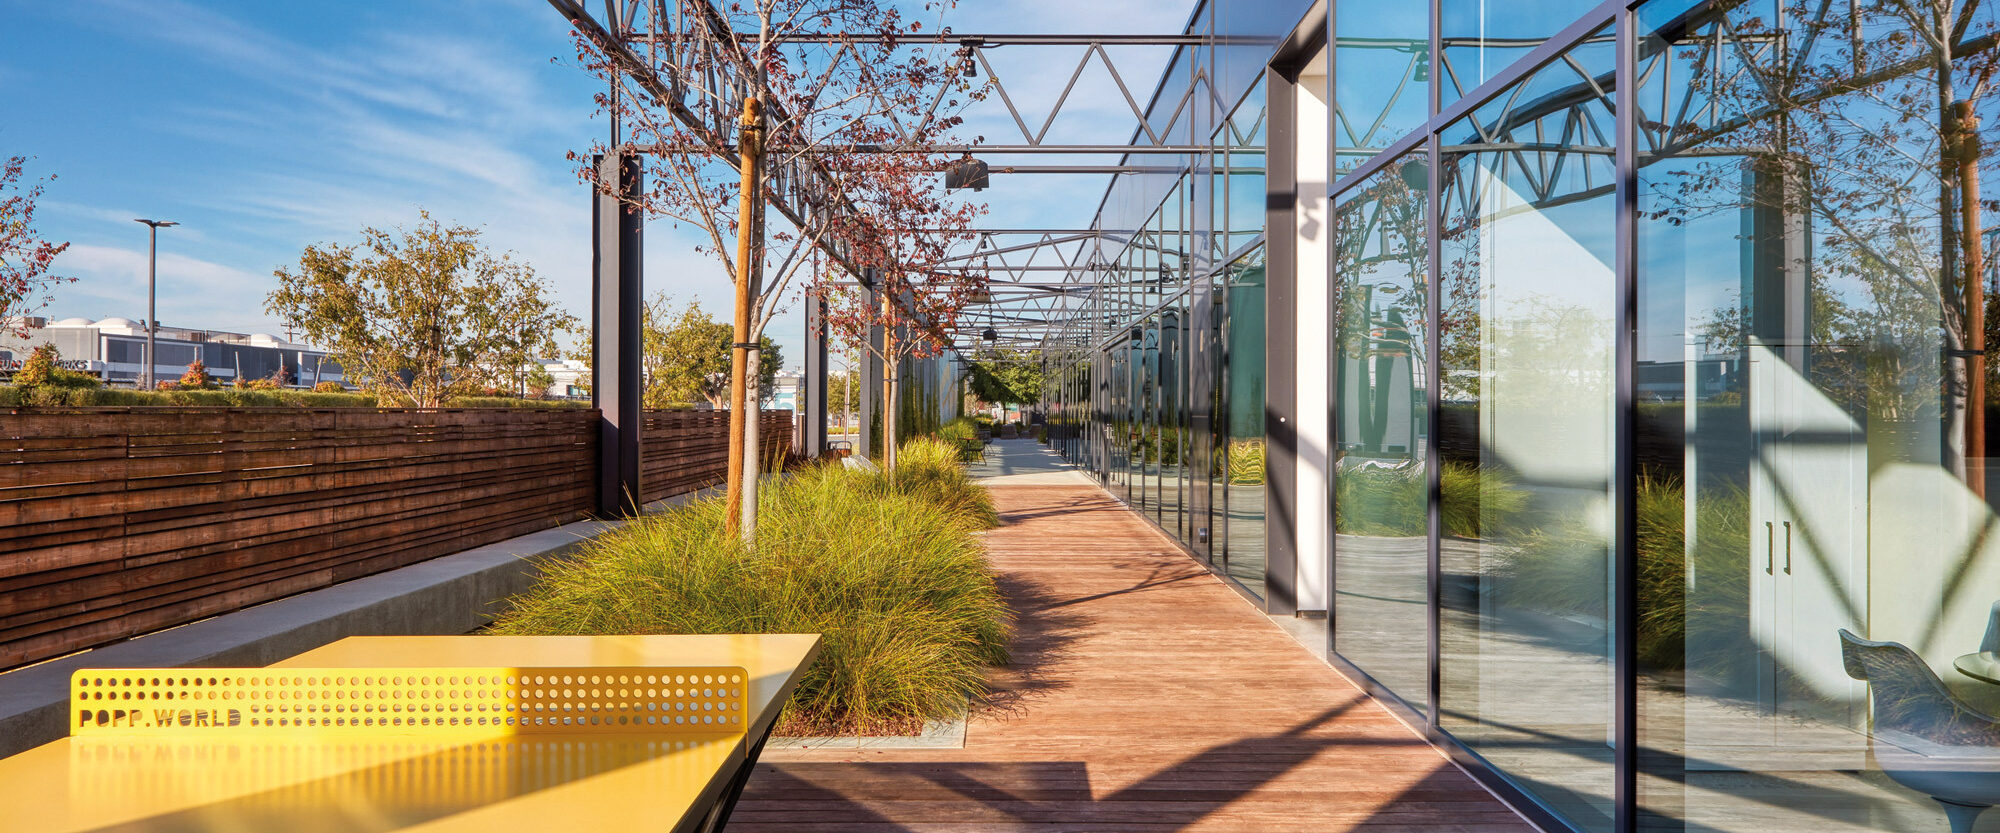 Lush outdoor corridor with a wooden pathway flanked by full-glass walls and green landscaping. Structural columns support a modern pergola, casting geometric shadows. A vibrant yellow bench adds a pop of color to the serene, natural setting.